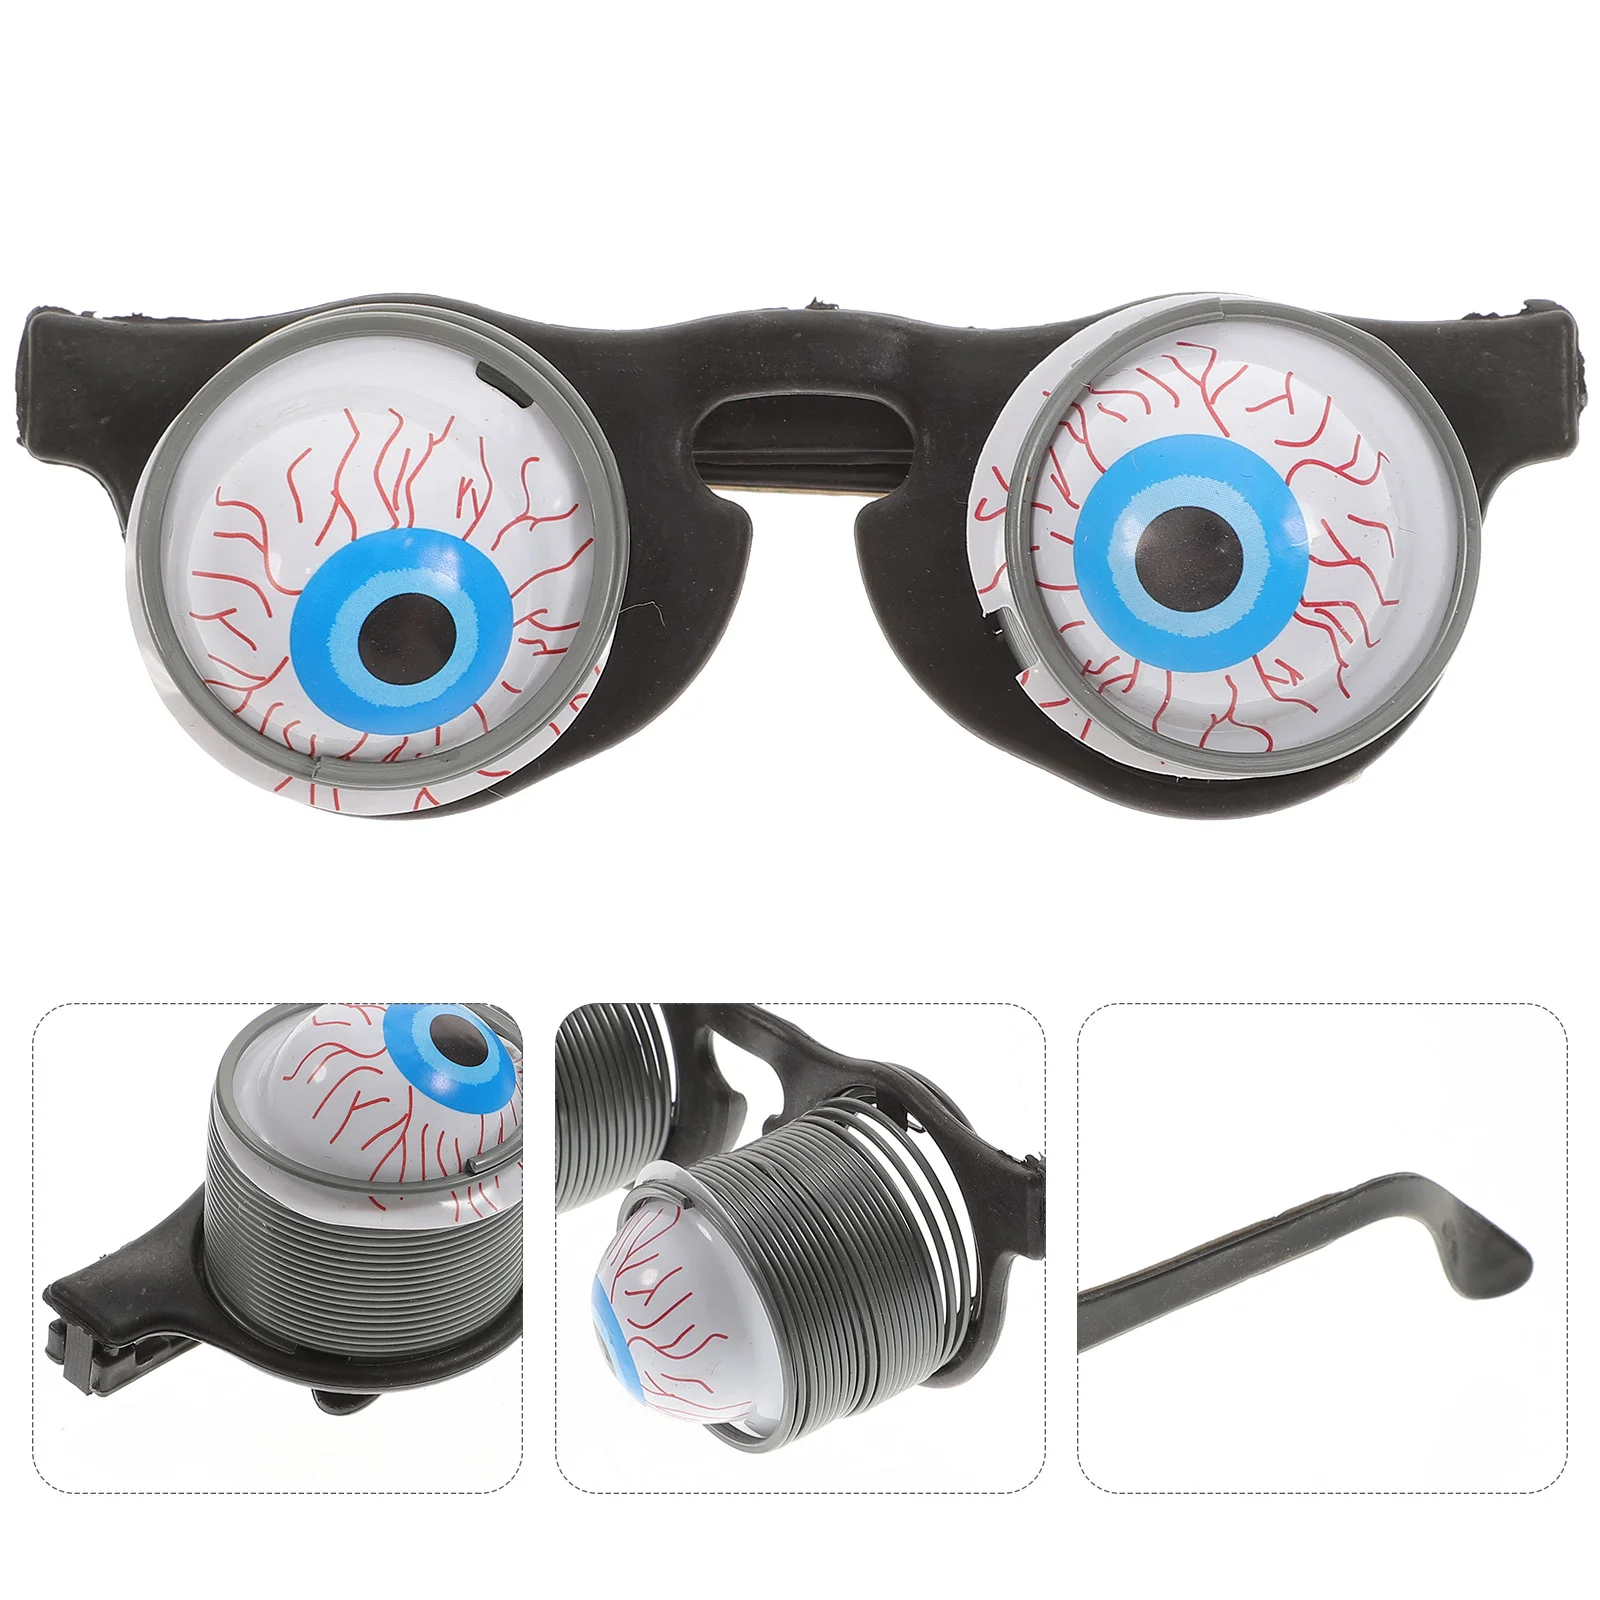 

Bloodshot Eyeballs Spring Glasses Horror Funny Disguise Eyeball-Dropping for Halloween Costume Party Fool's Day